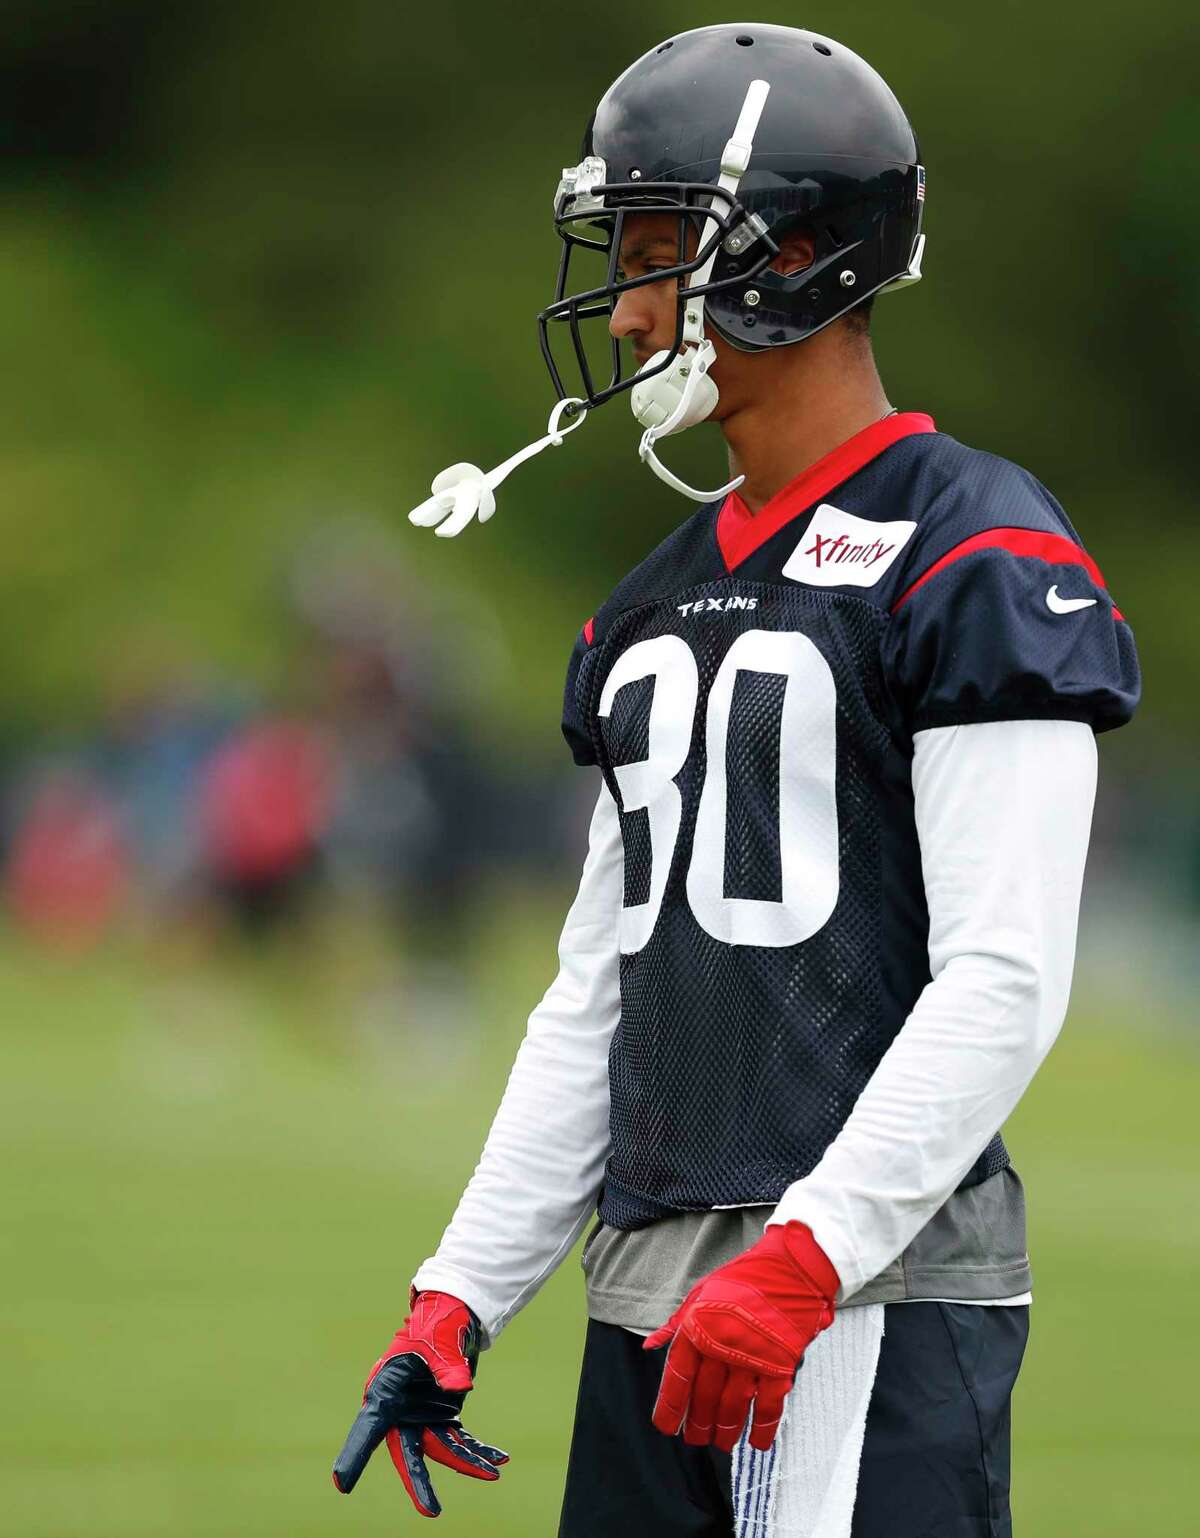 Houston Texans cornerback Kevin Johnson (30) stands on the field during training camp at the Greenbrier on Thursday, July 27, 2017, in White Sulphur Springs, W.Va.